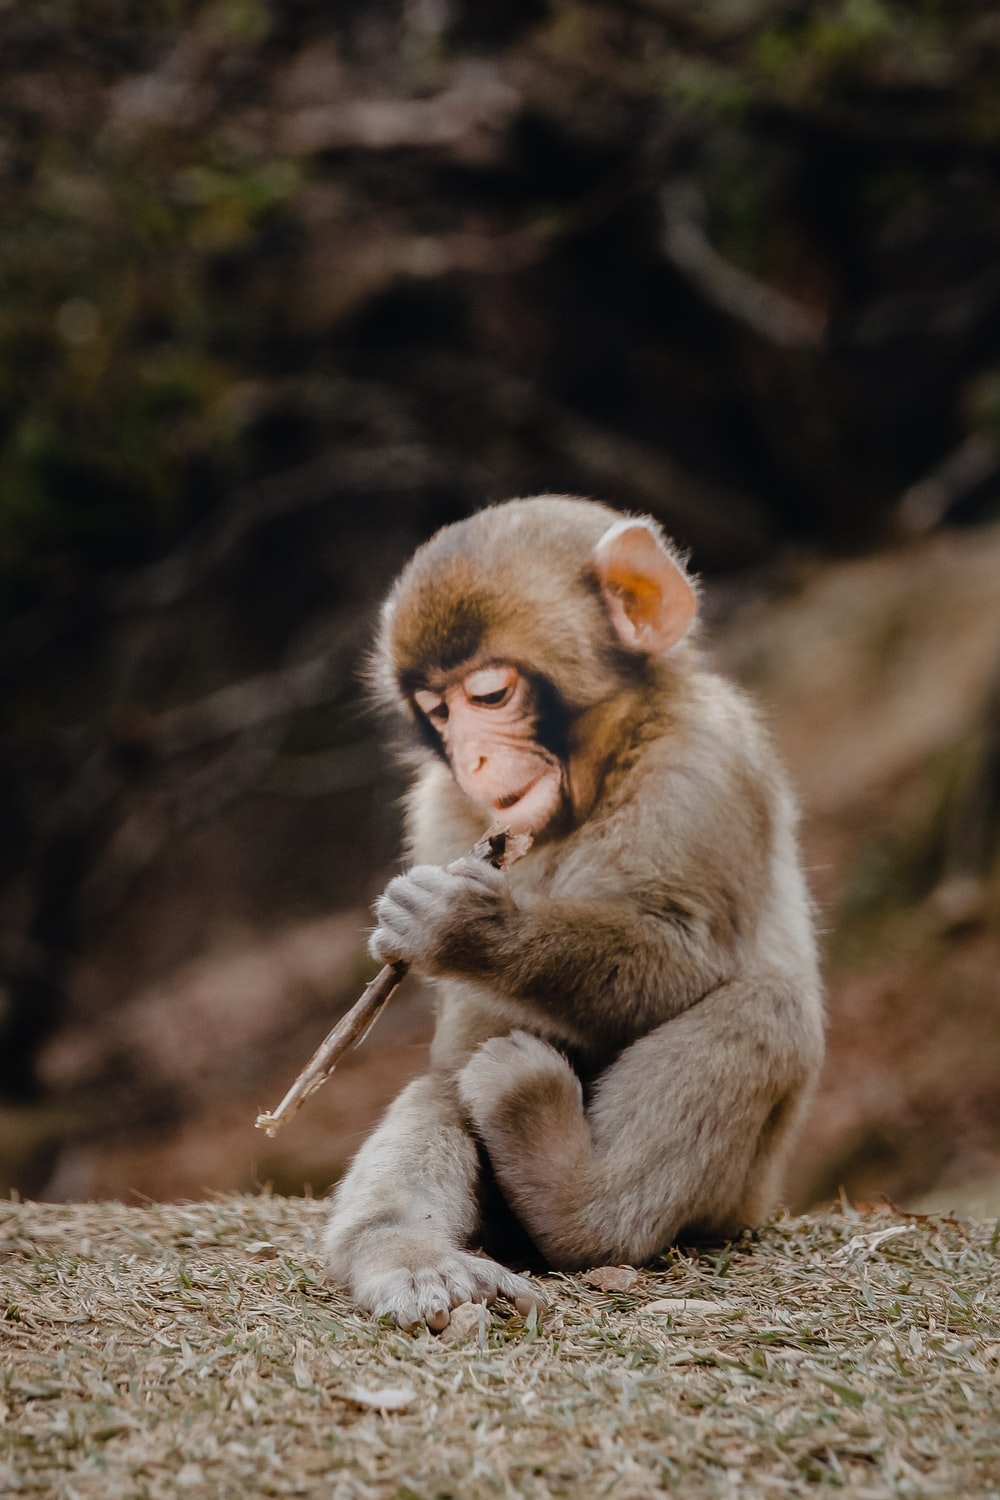 Baby Monkey Picture. Download Free Image